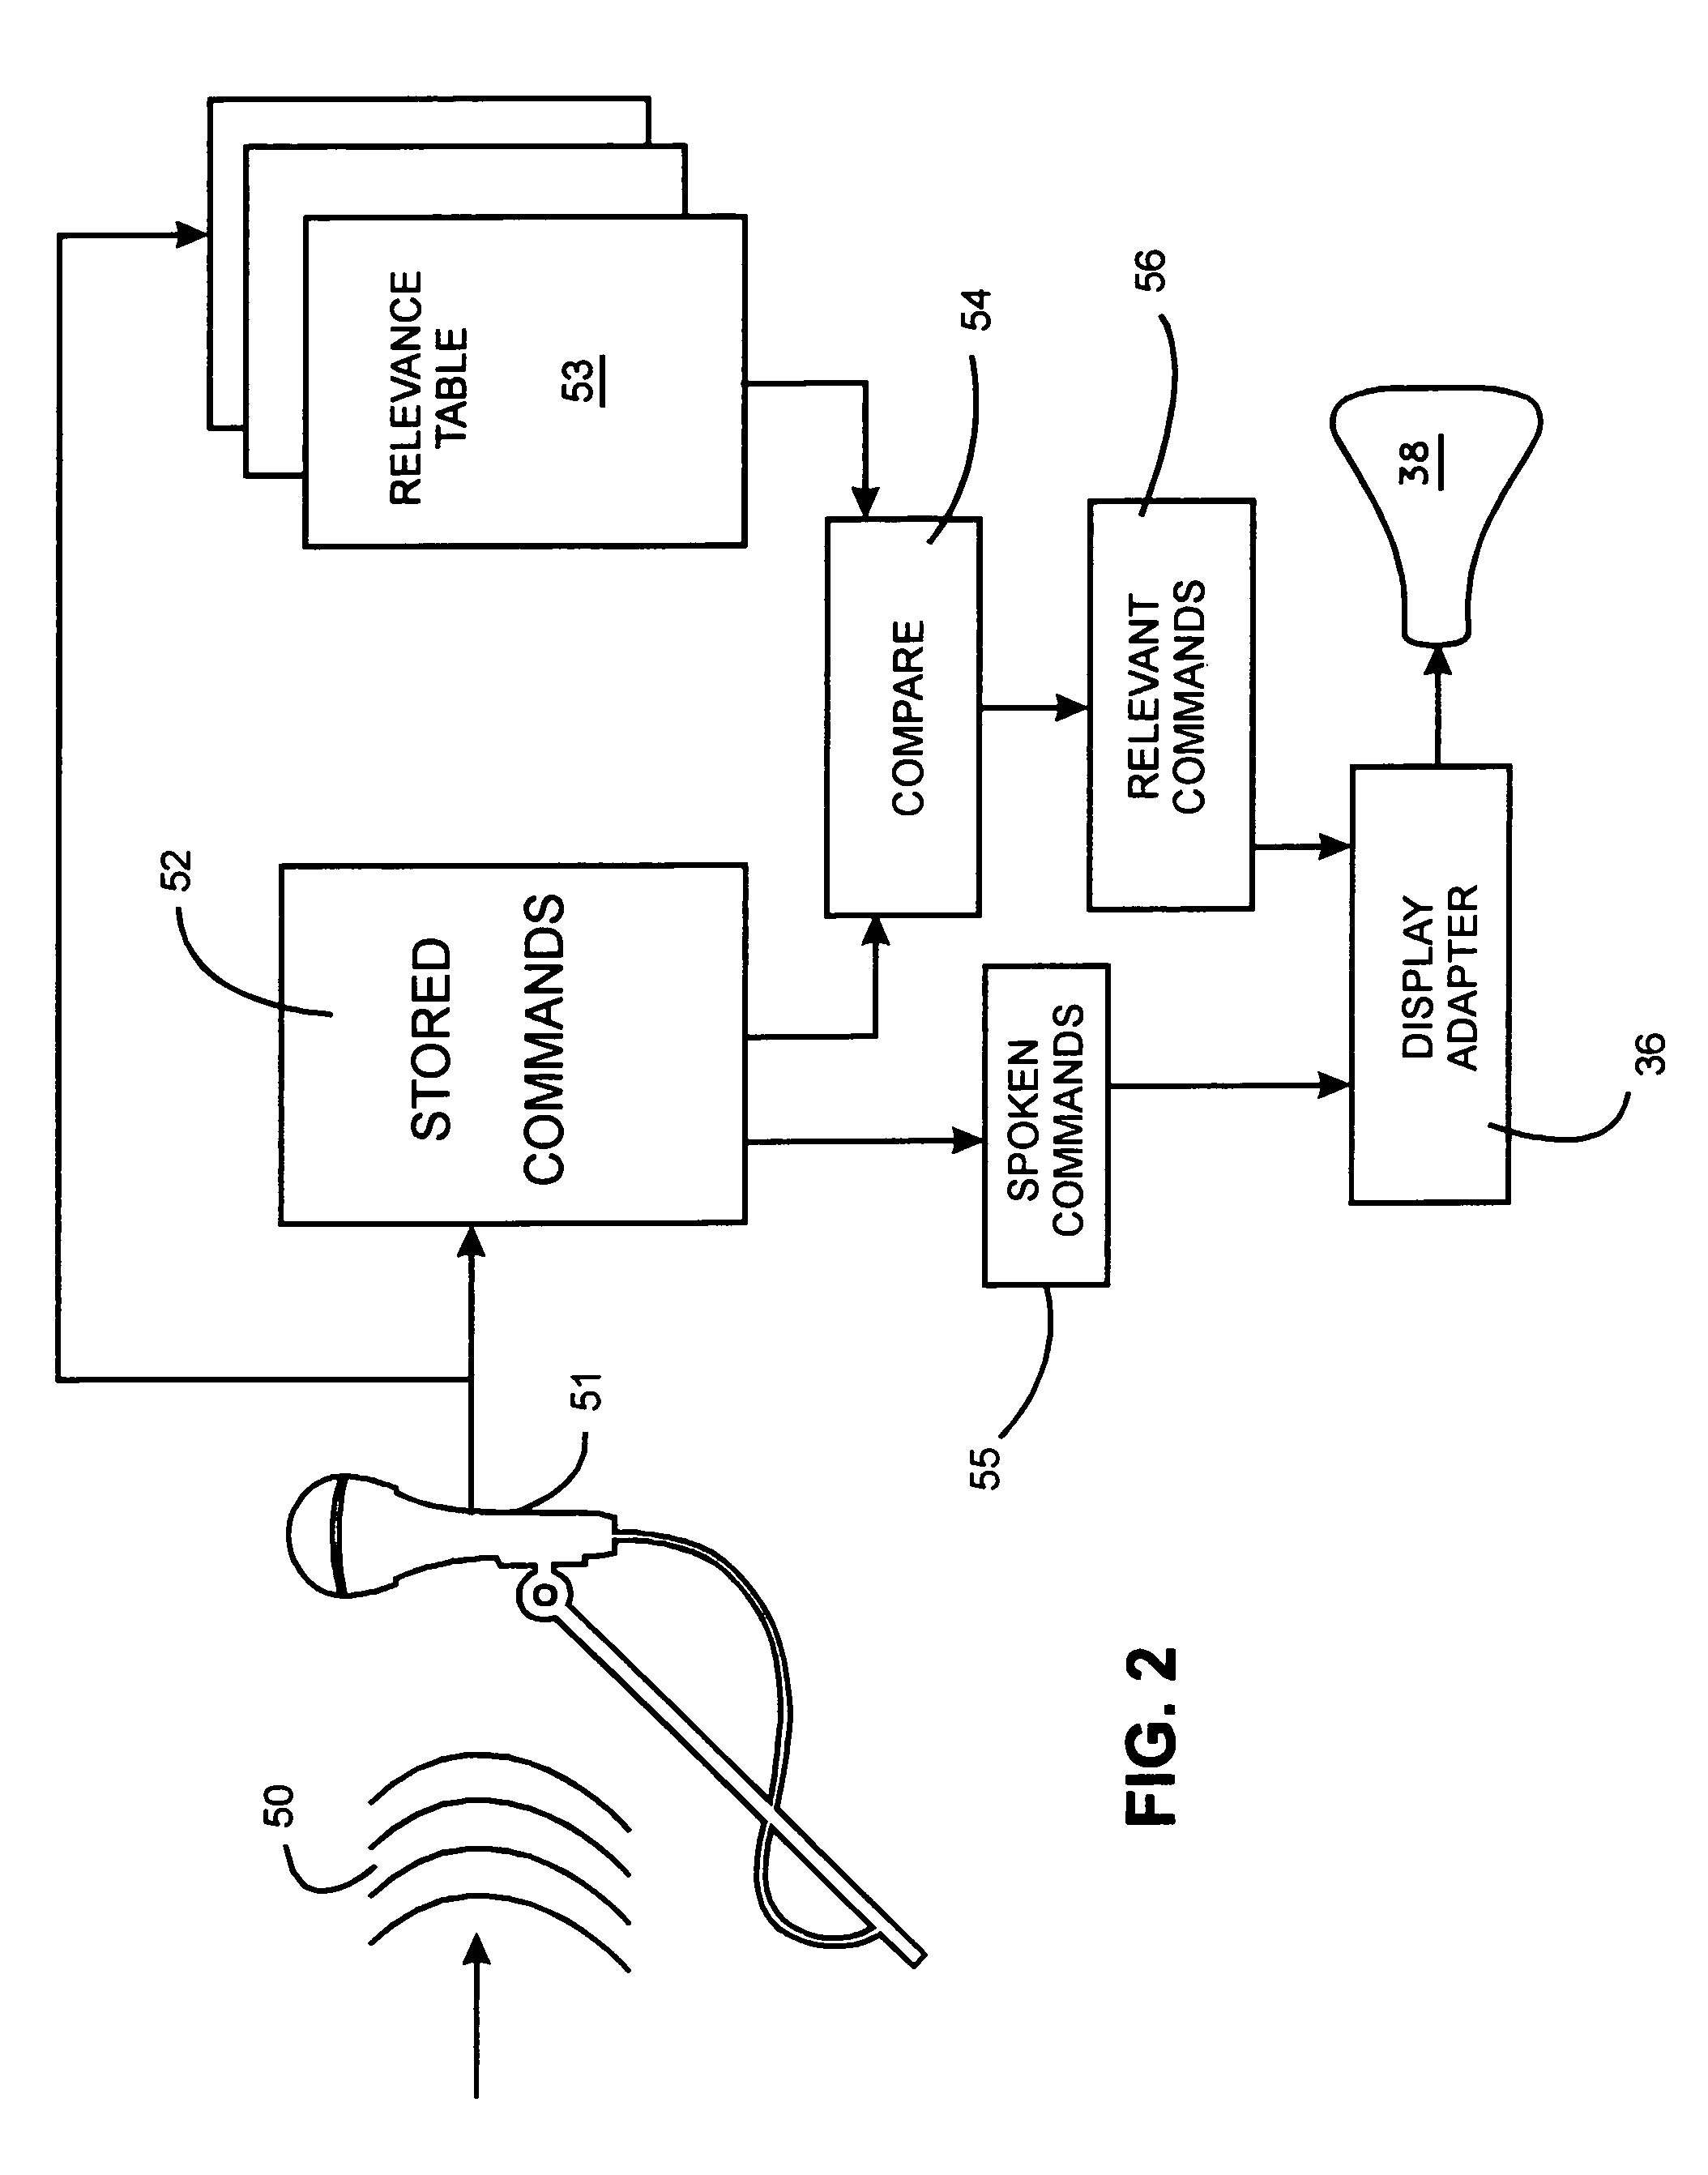 Speech command input recognition system for interactive computer display with means for concurrent and modeless distinguishing between speech commands and speech queries for locating commands